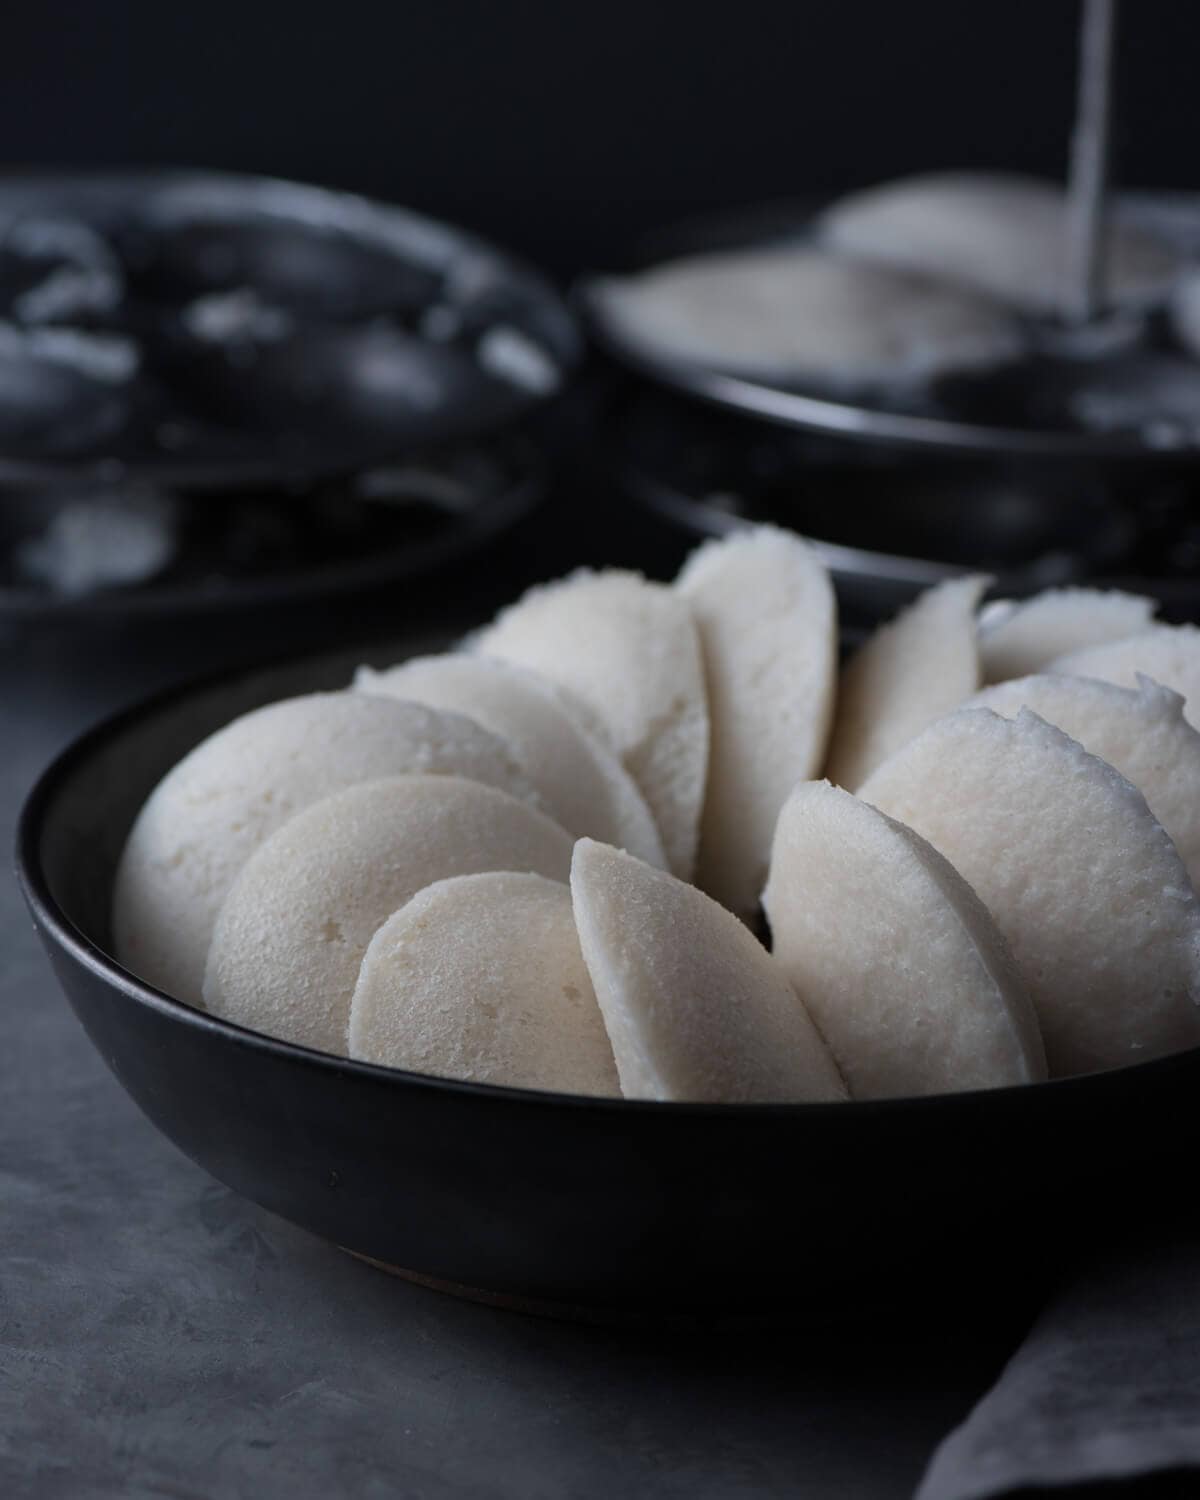 Instant Pot idli – How to ferment batter and steam idlis using Instant Pot